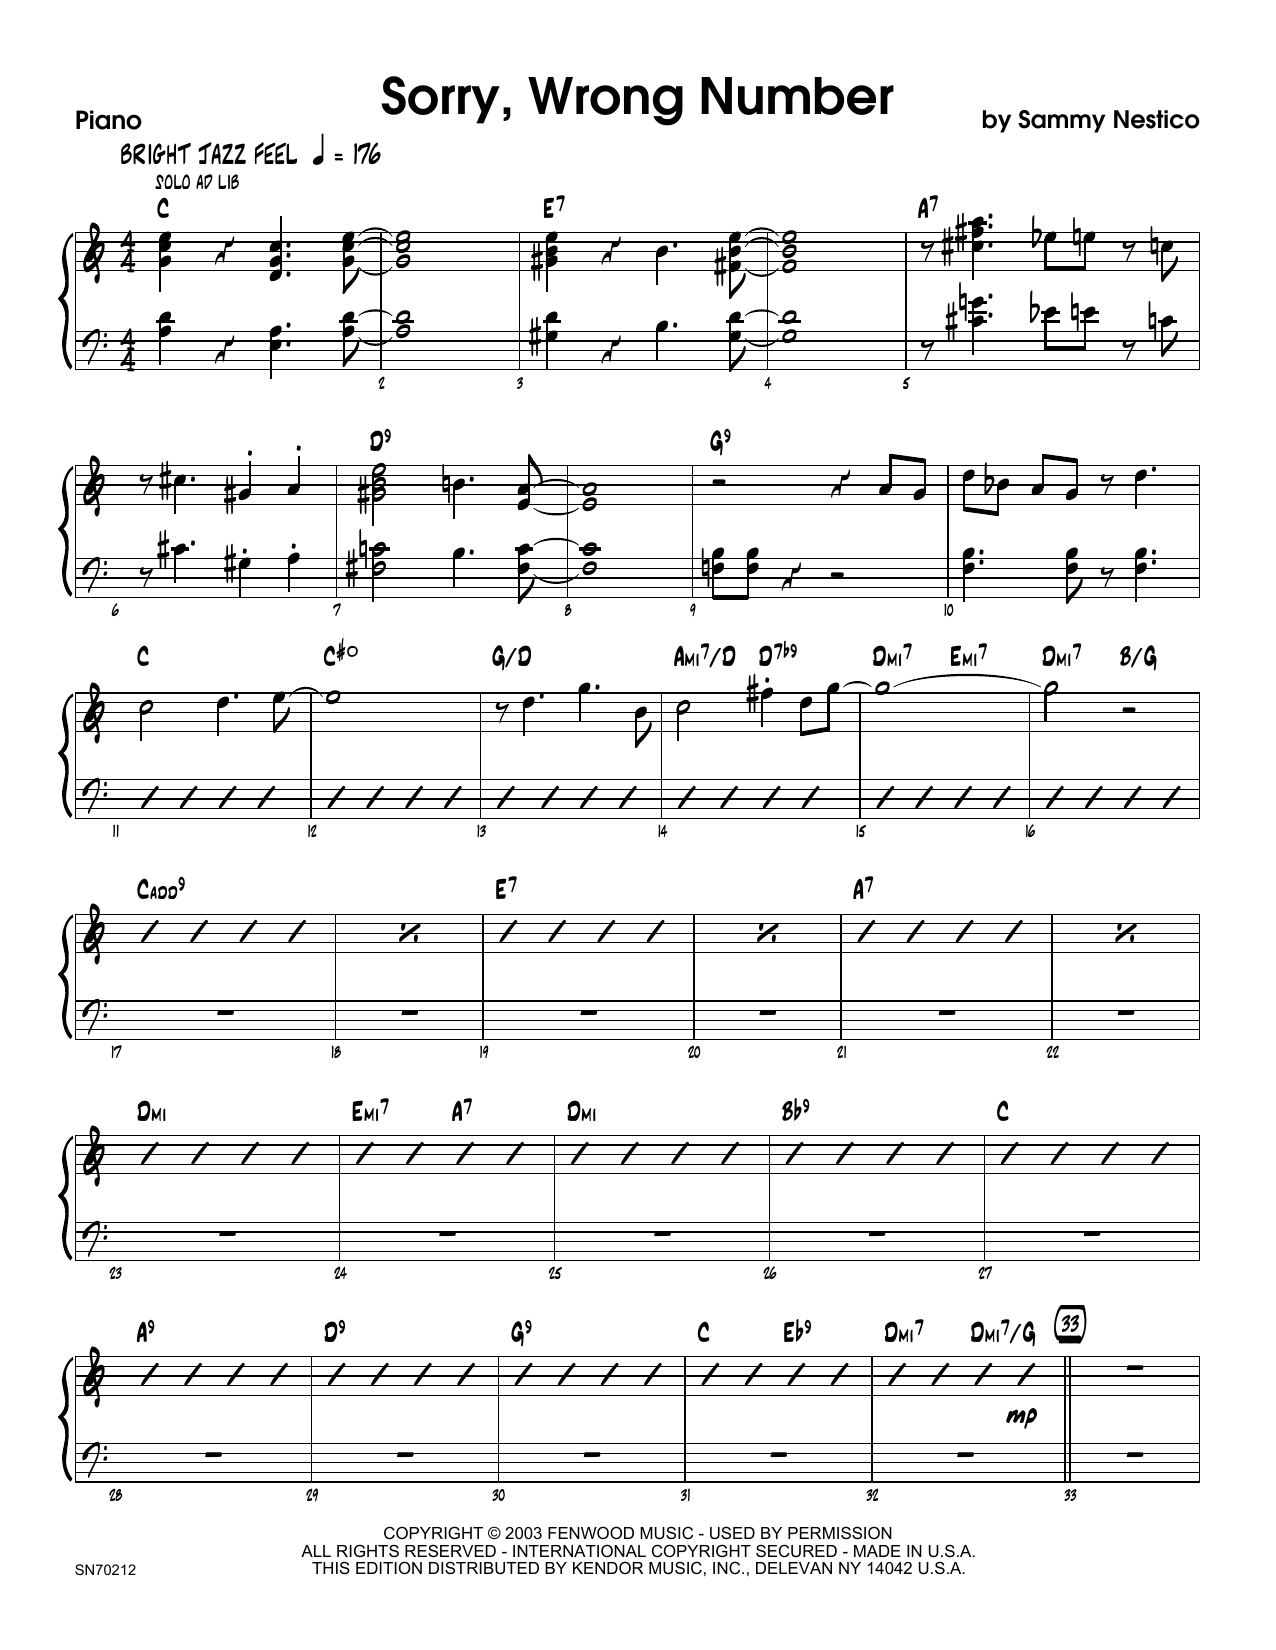 Download Sammy Nestico Sorry, Wrong Number - Piano Sheet Music